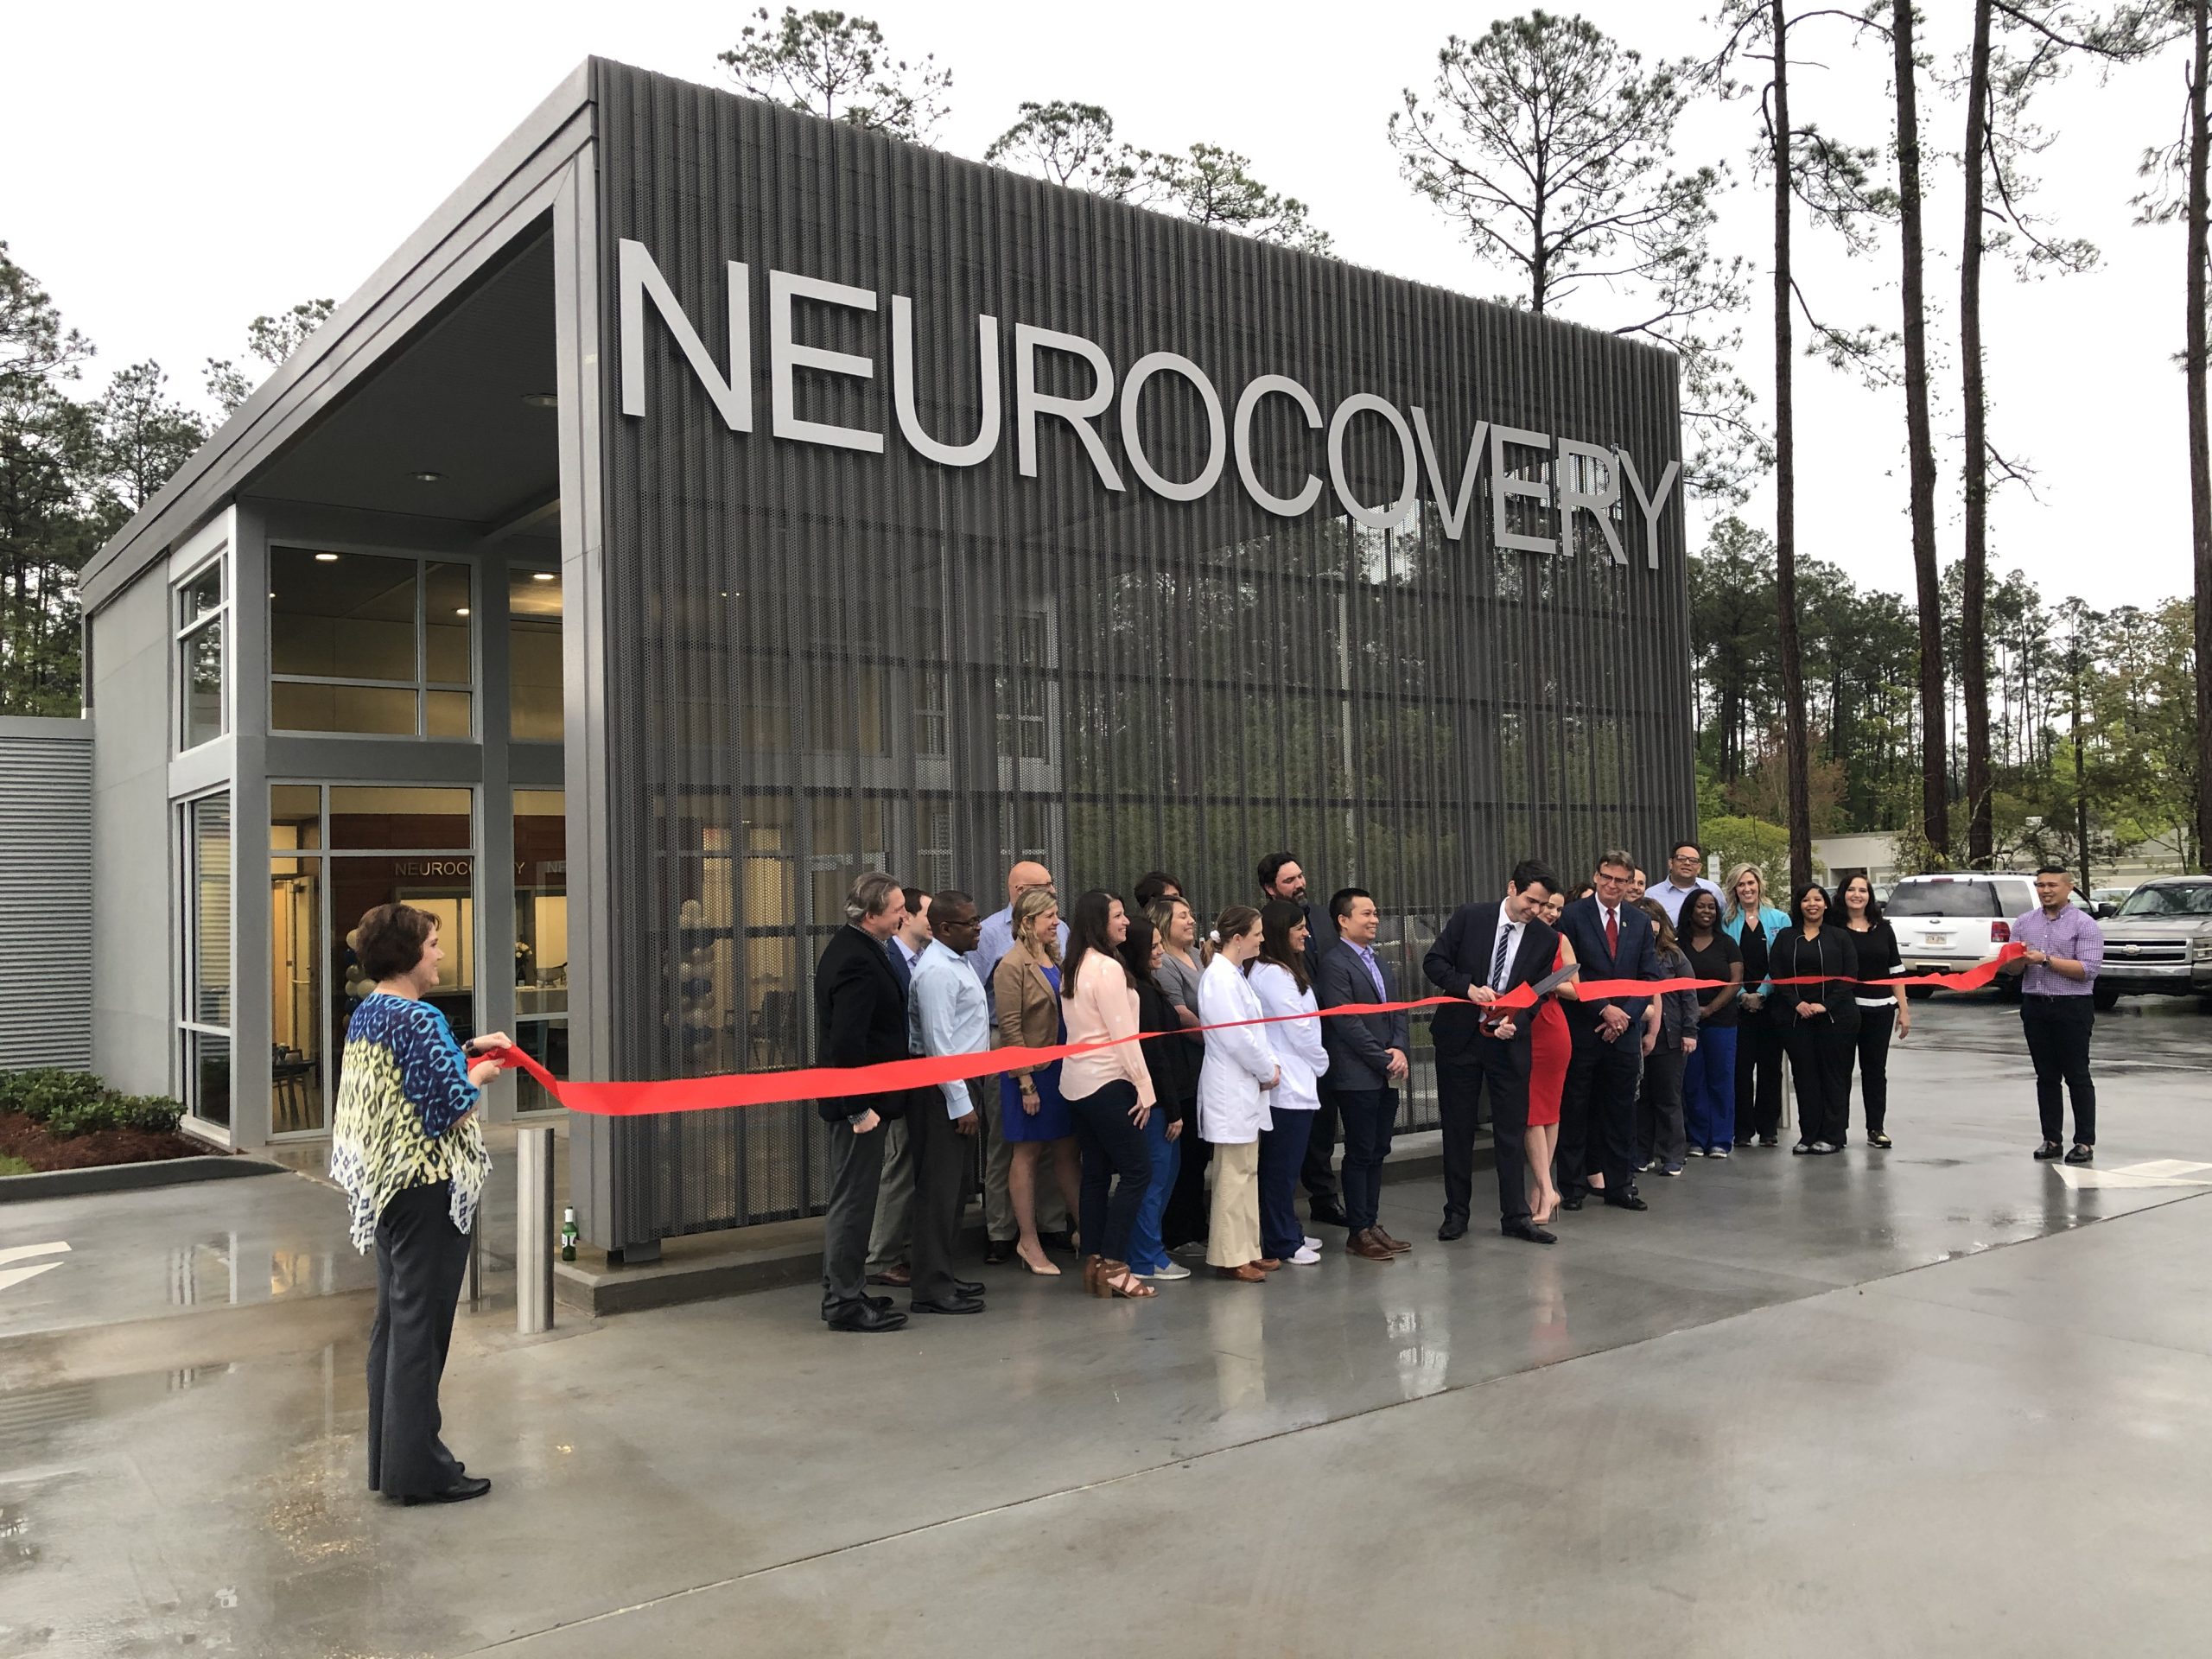 Neurocovery celebrates new location with grand opening in Covington